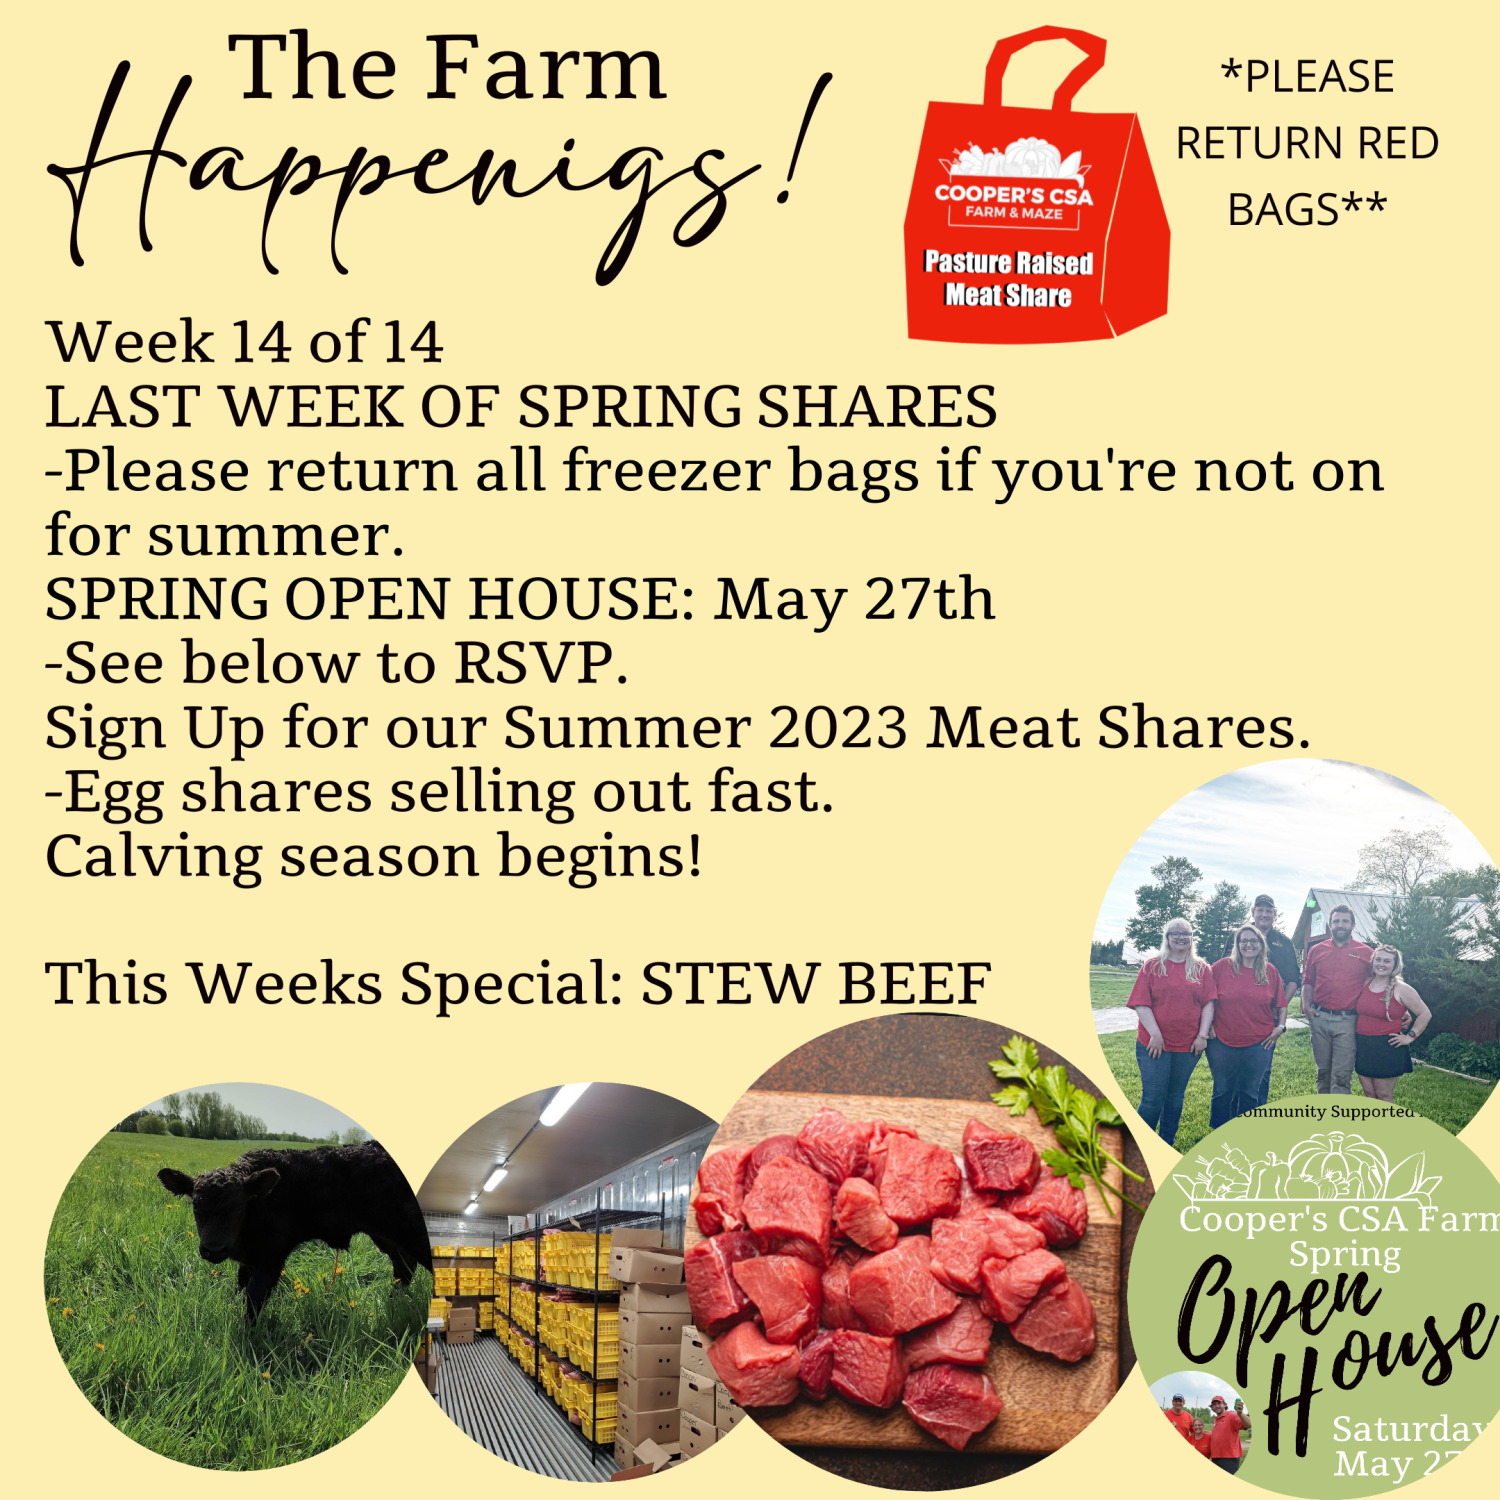 Previous Happening: "Pasture Meat Shares"-Coopers CSA Farm Farm Happenings Week 14